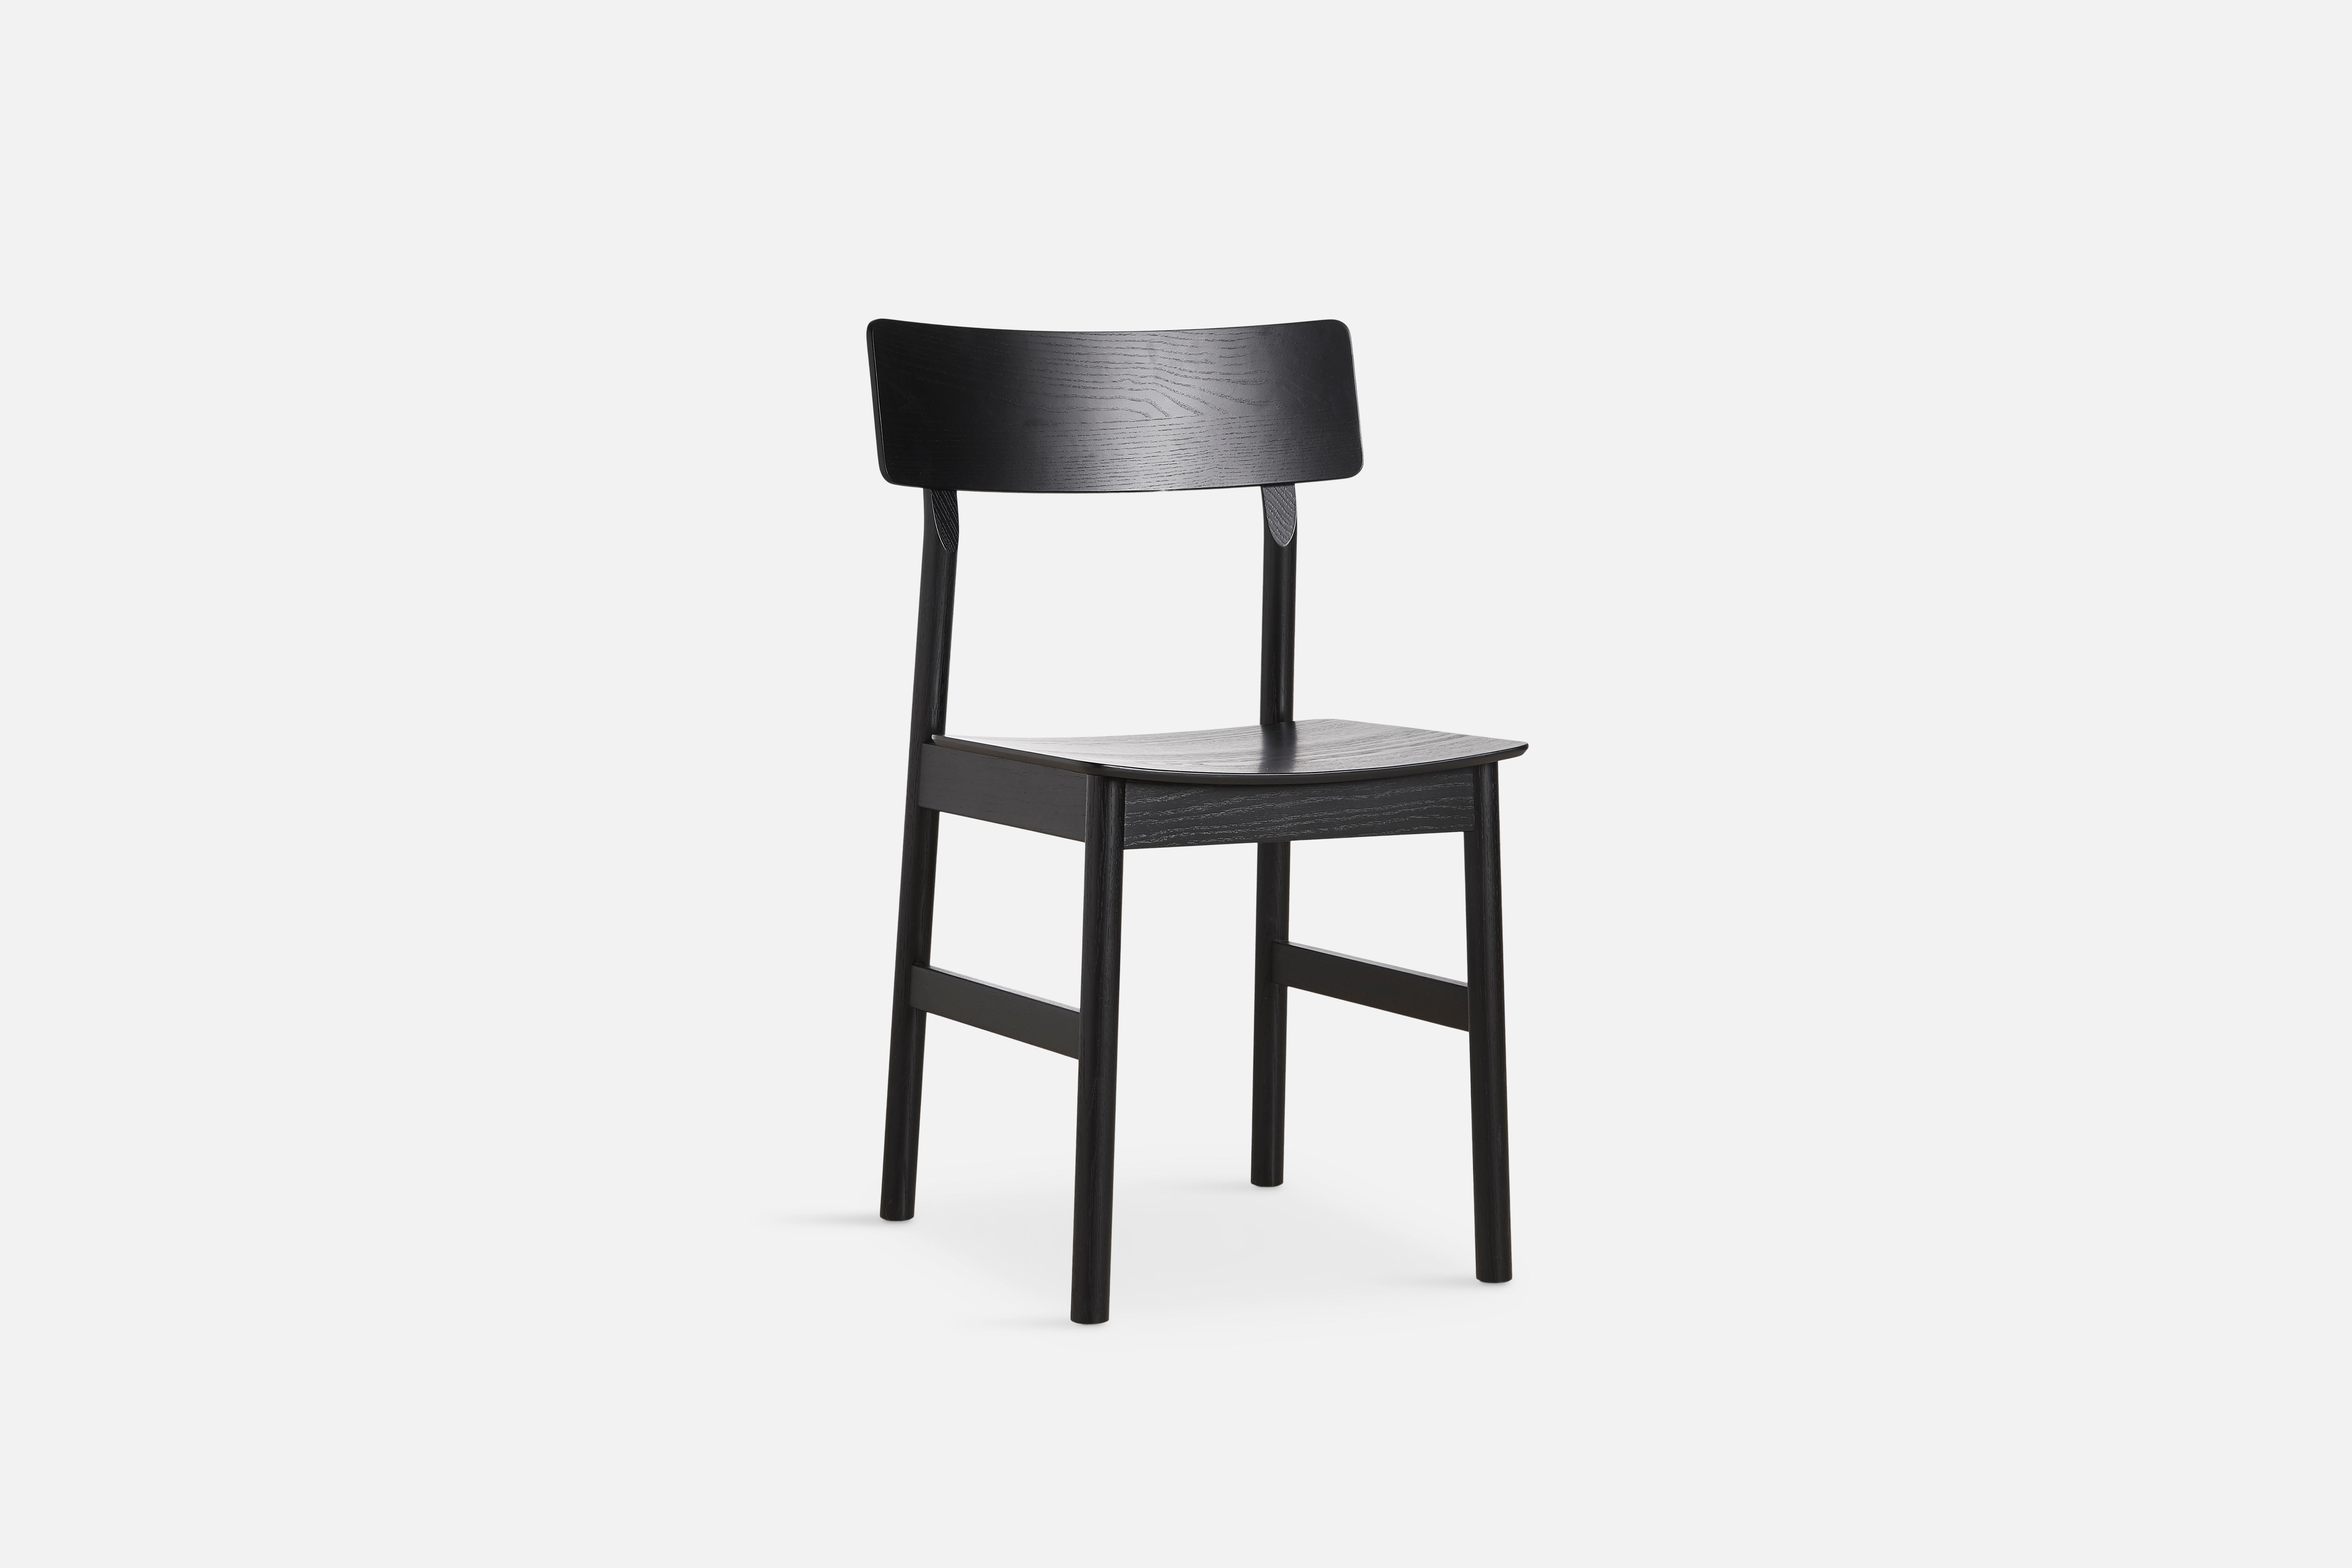 Pause Black Dining Chair 2.0 by Kasper Nyman.
Materials: Ash, Plywood.
Dimensions: D 47 x W 48 x H 80 cm.
Also available in different colours and finishes. 

The founders, Mia and Torben Koed, decided to put their 30 years of experience into a